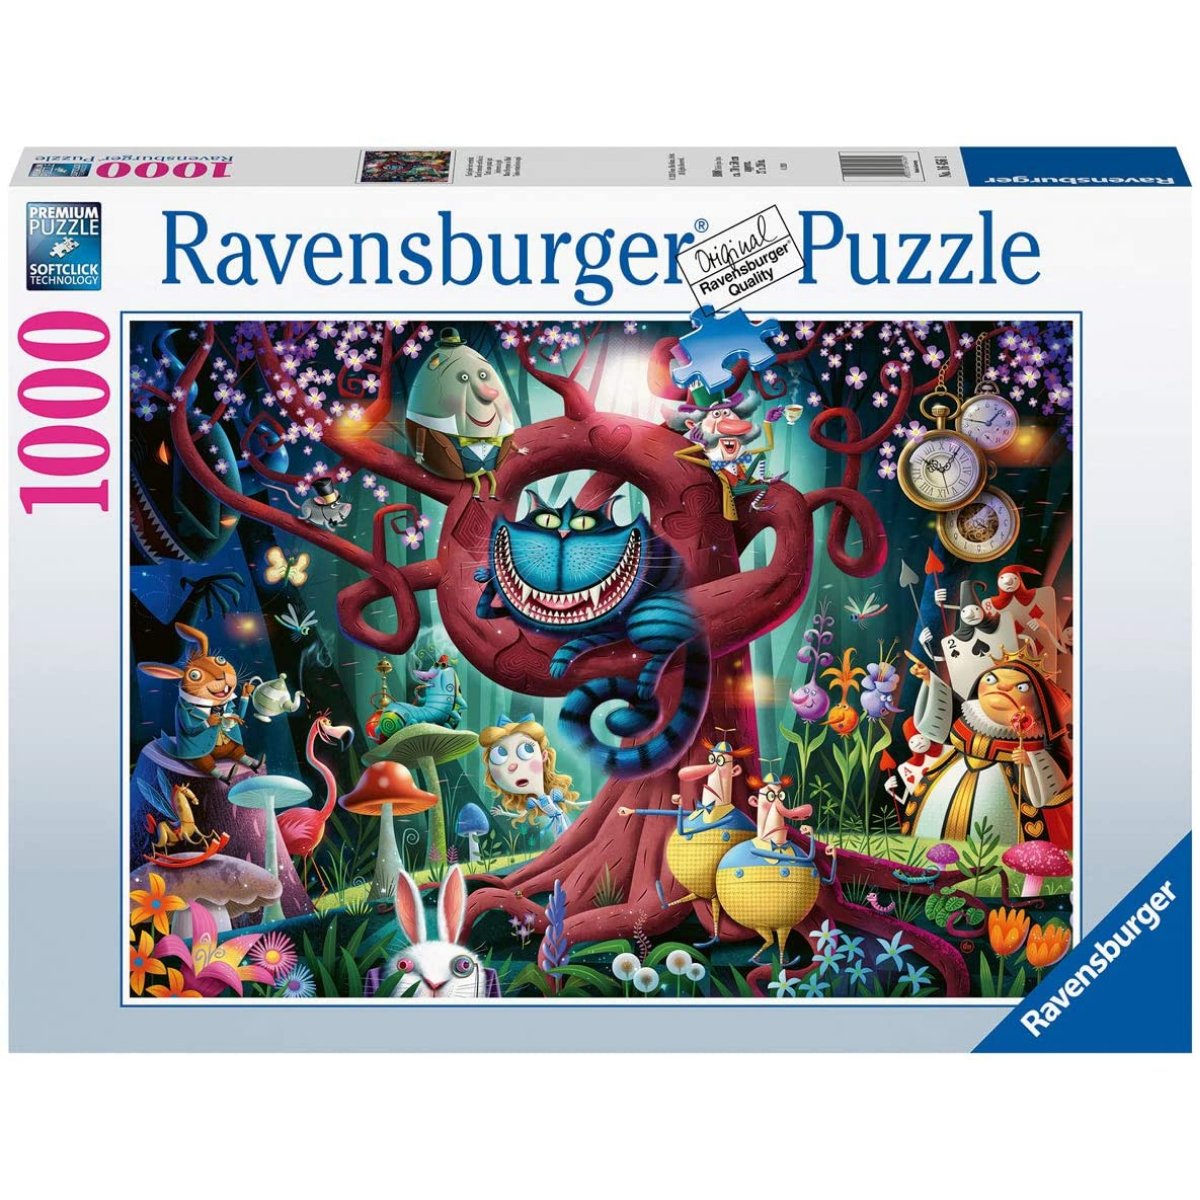 Ravensburger Almost Everyone is Mad (Alice in Wonderland) 1000 Piece Jigsaw Puzzle - Phillips Hobbies